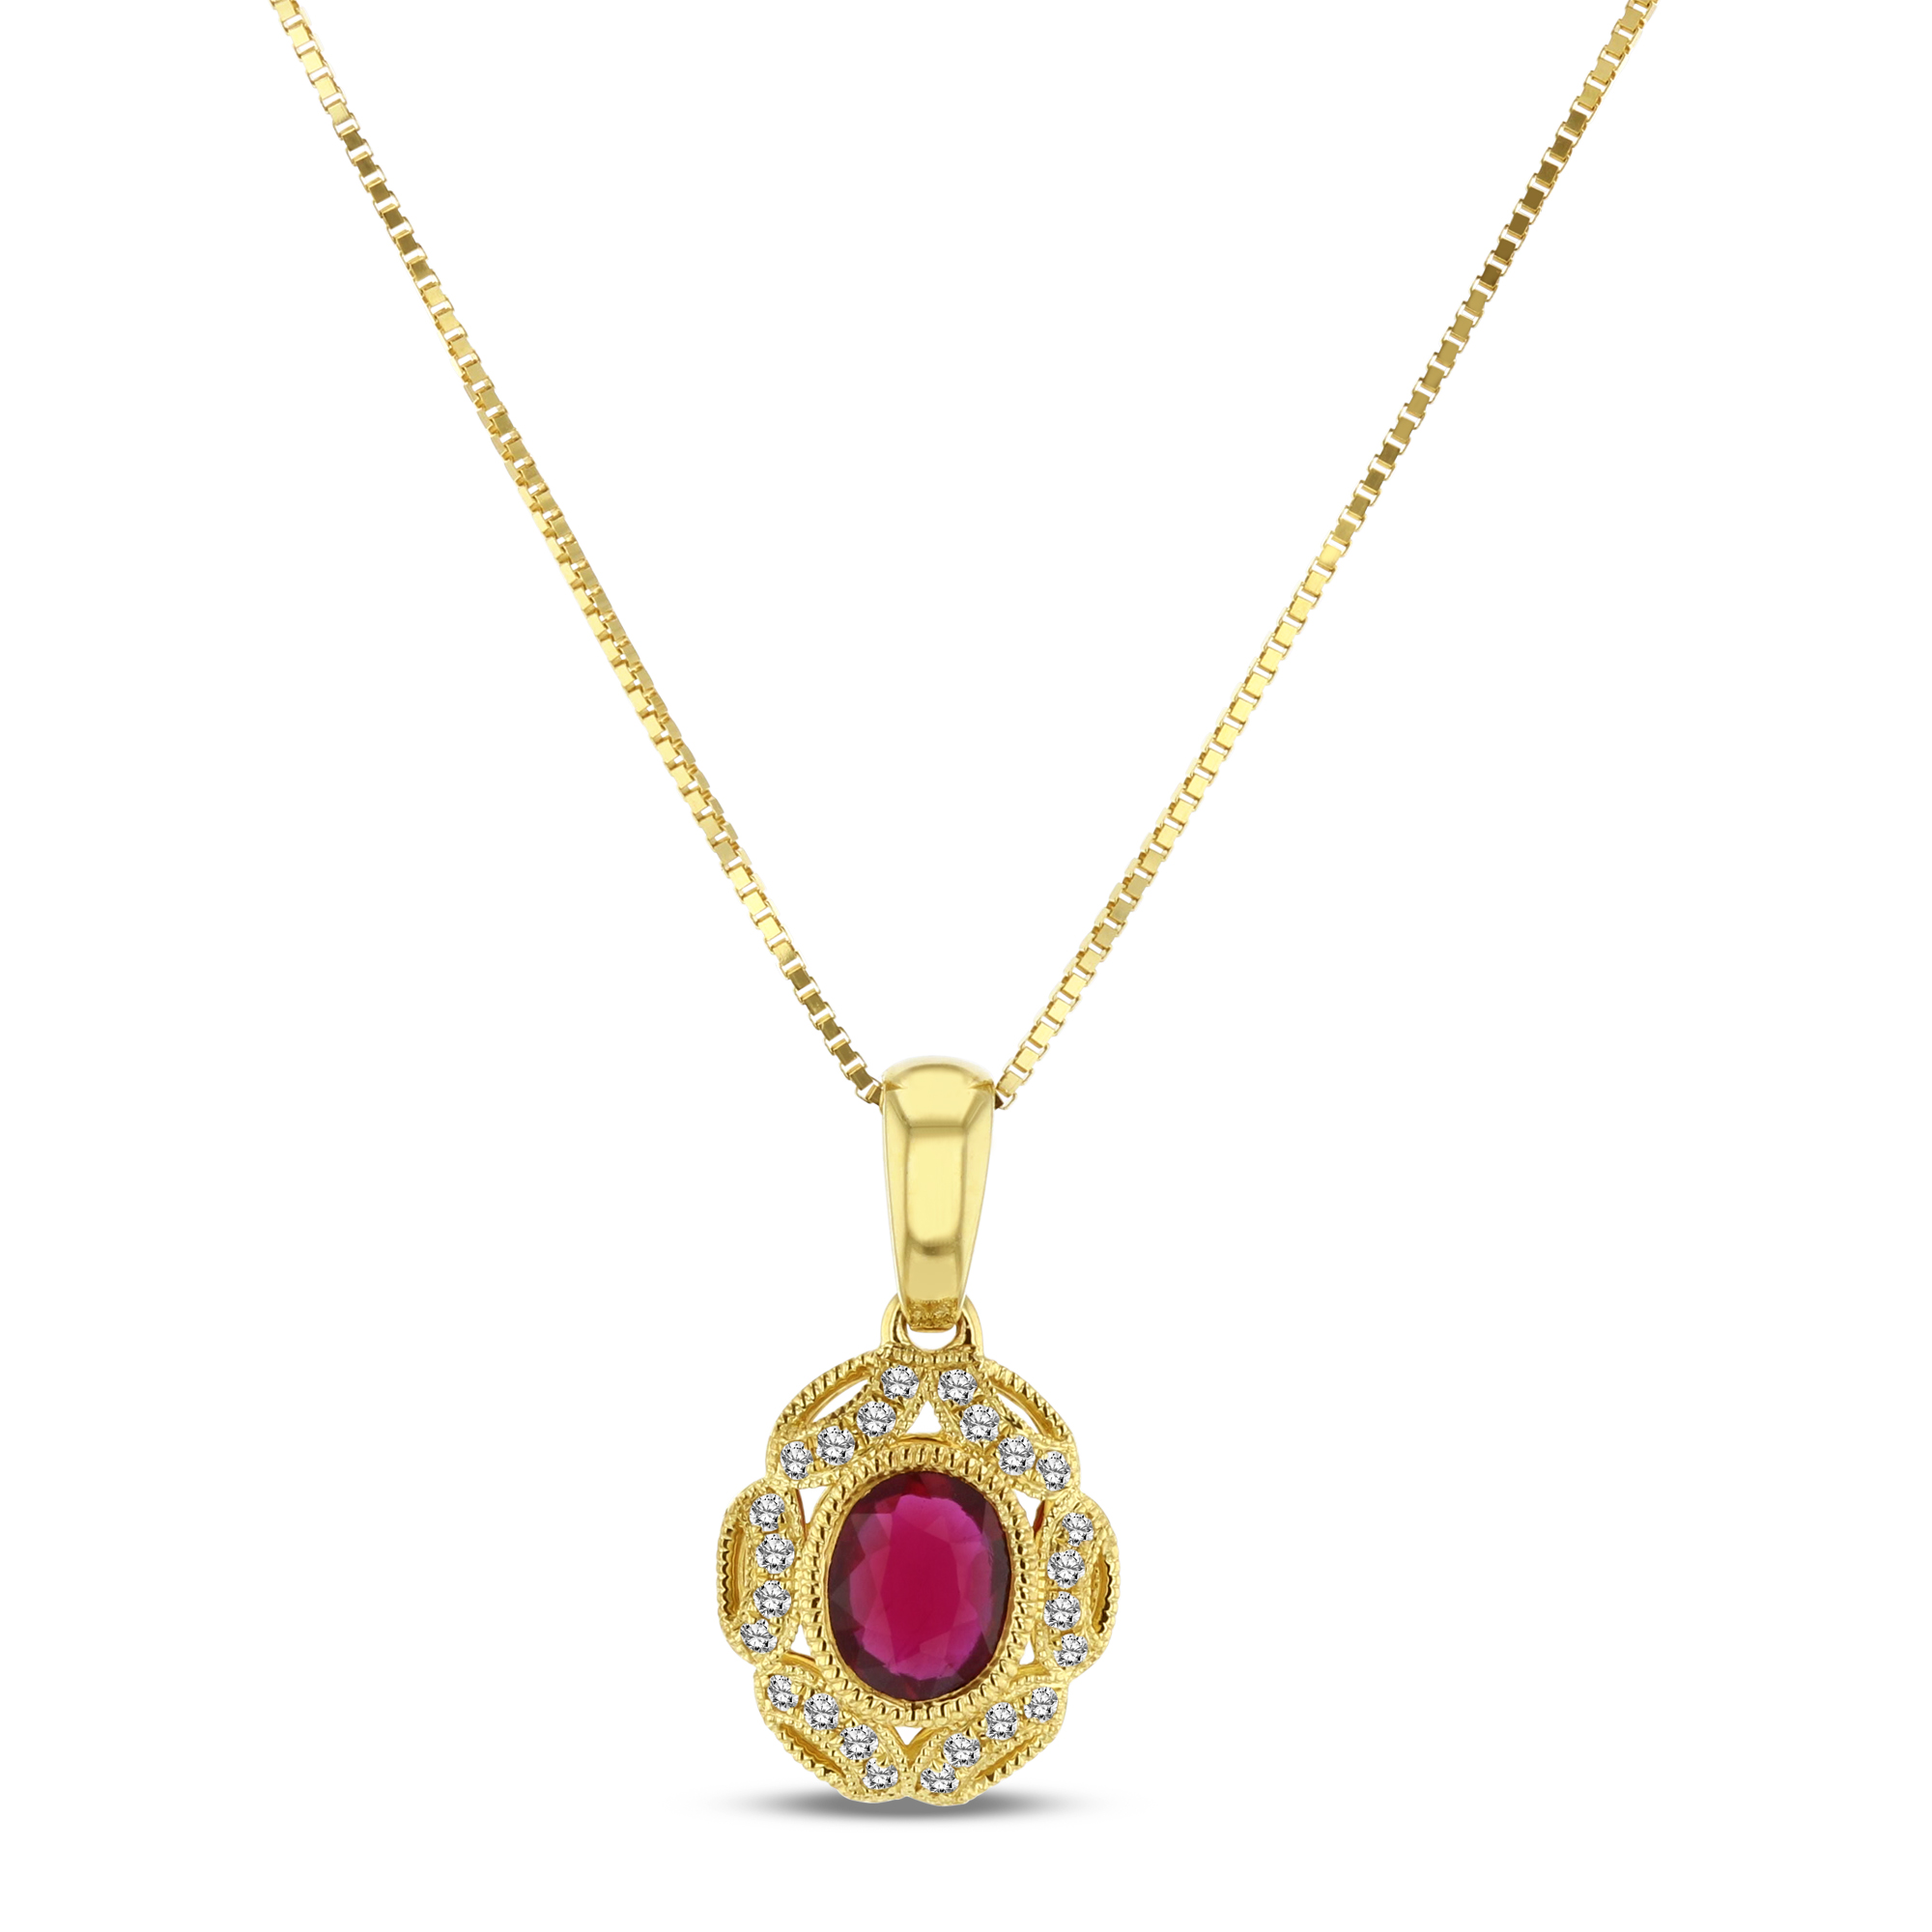 View 0.07ctw Diamond and Ruby Art Deco Pendant in 14k Yellow Gold